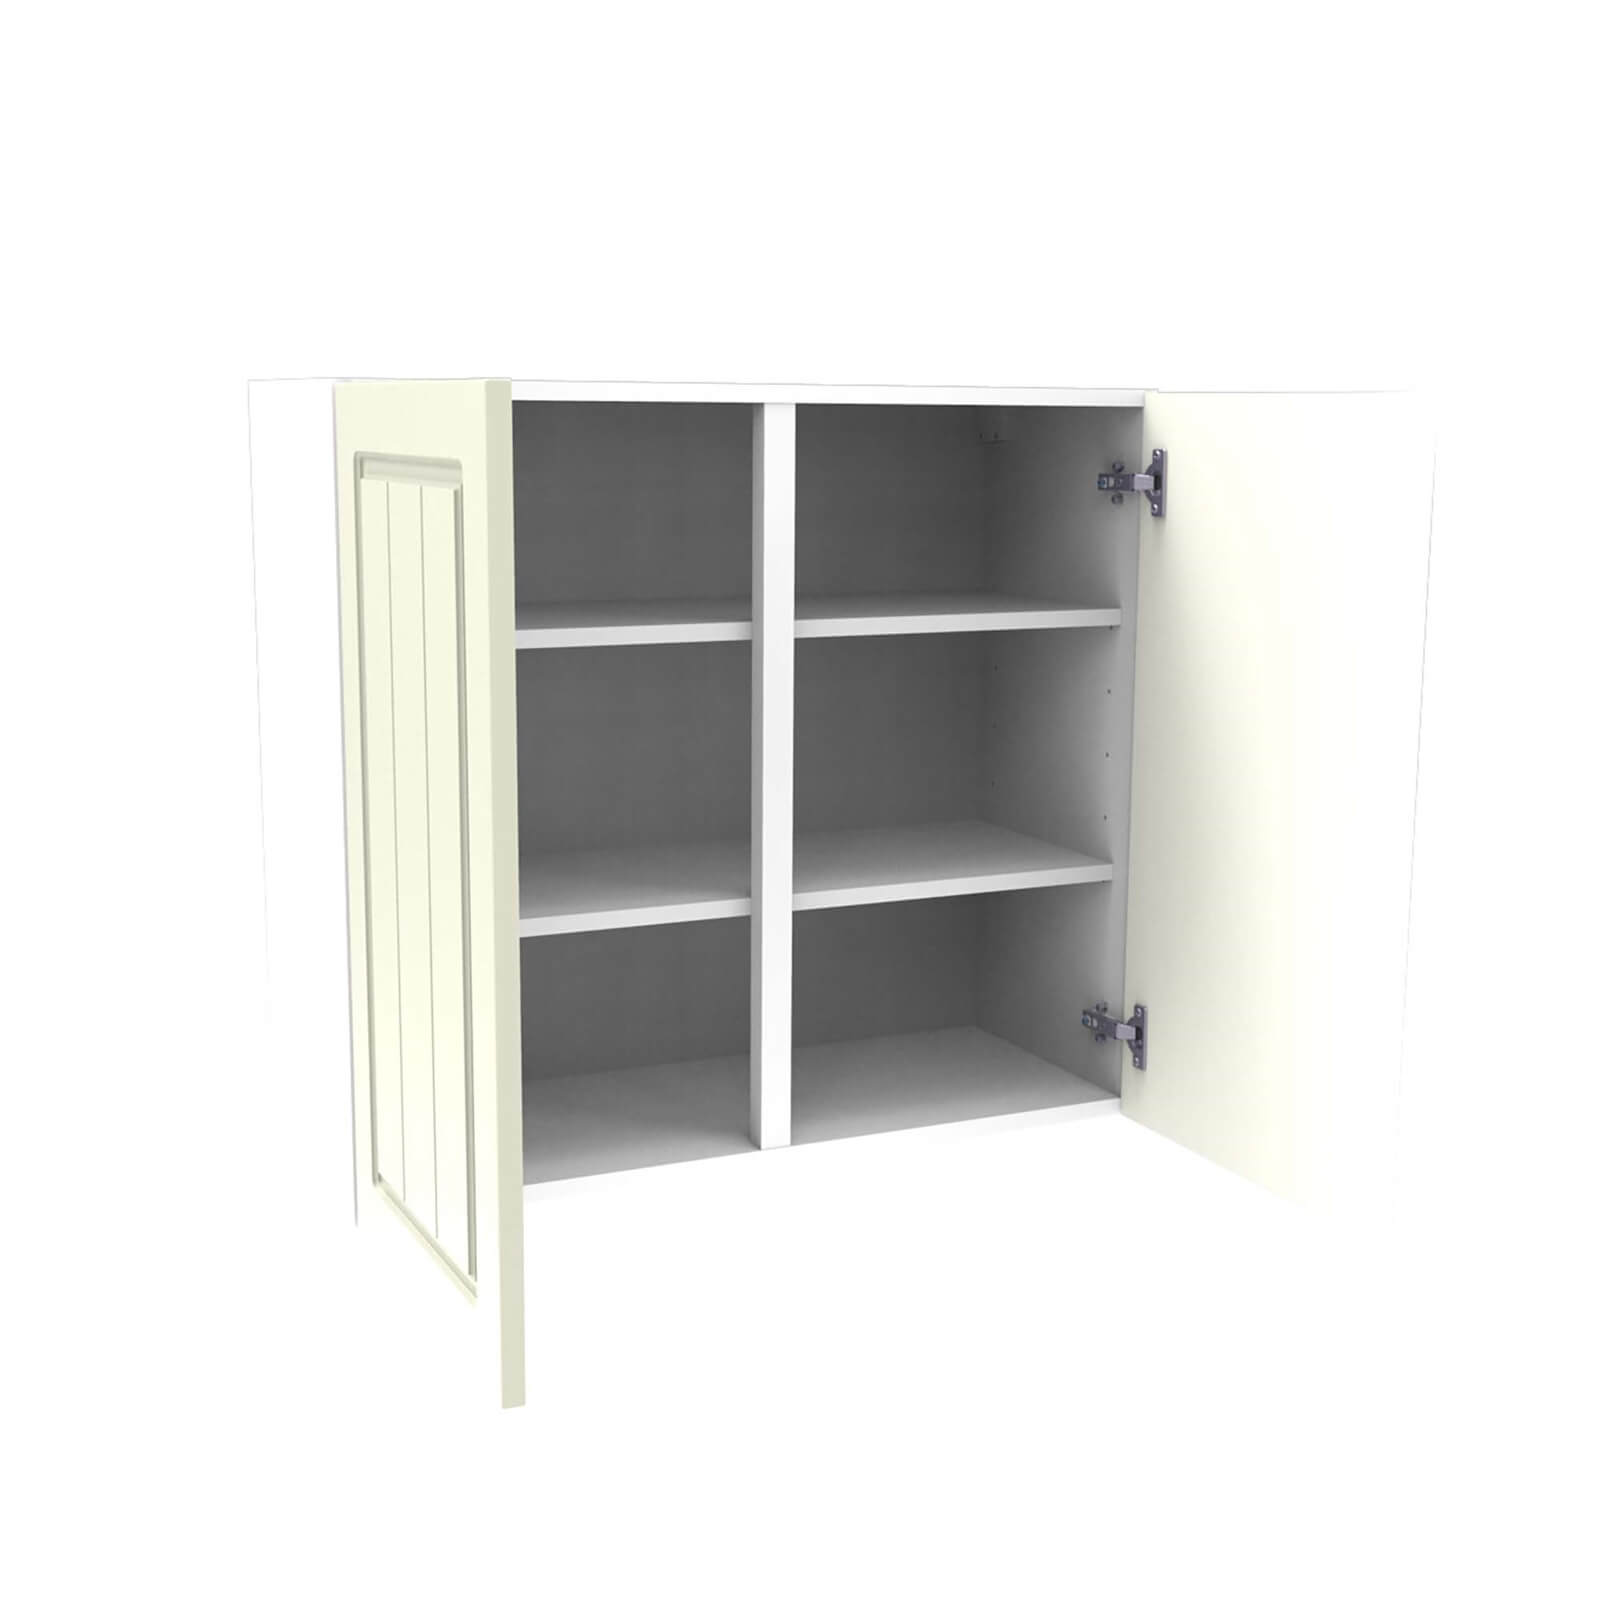 Country Shaker Cream 800mm Wall Unit